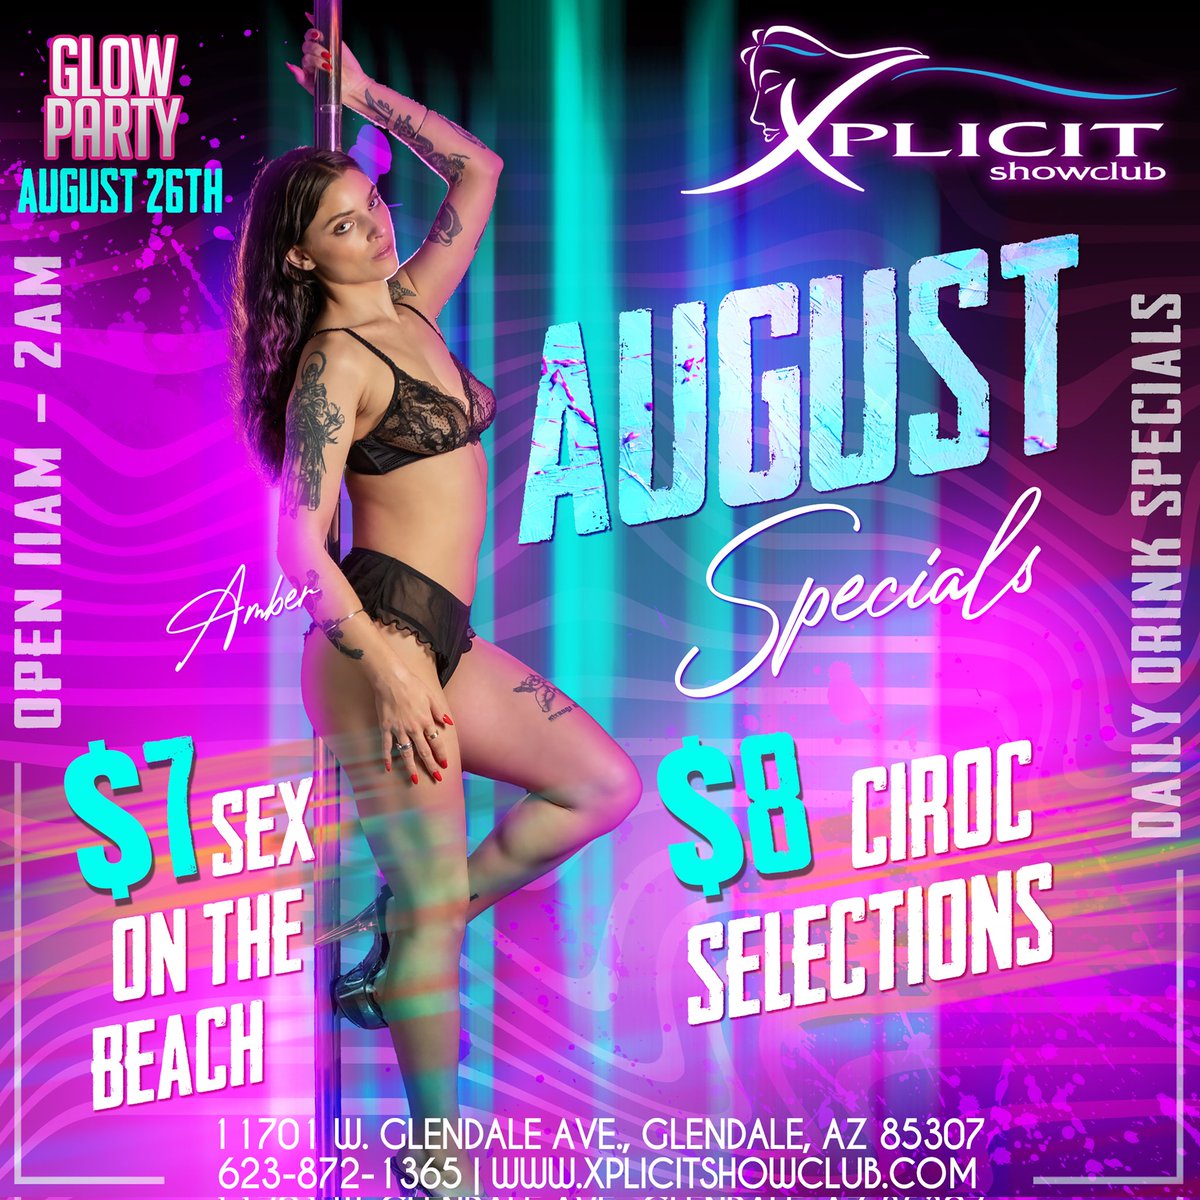 🌴🍹 Sip into Summer Bliss with August Specials
🏖️ $7 Sex on the Beach Drinks 🍹
🍸 $8 Ciroc Vodka Selections 🌞
Indulge with the Best View in Town!💃
Join Amber and the XGirls for a Taste of Paradise! 🍹🌞🏝️
#AugustSpecials #CocktailDelights #SummerSips #GlowParty on August 26th